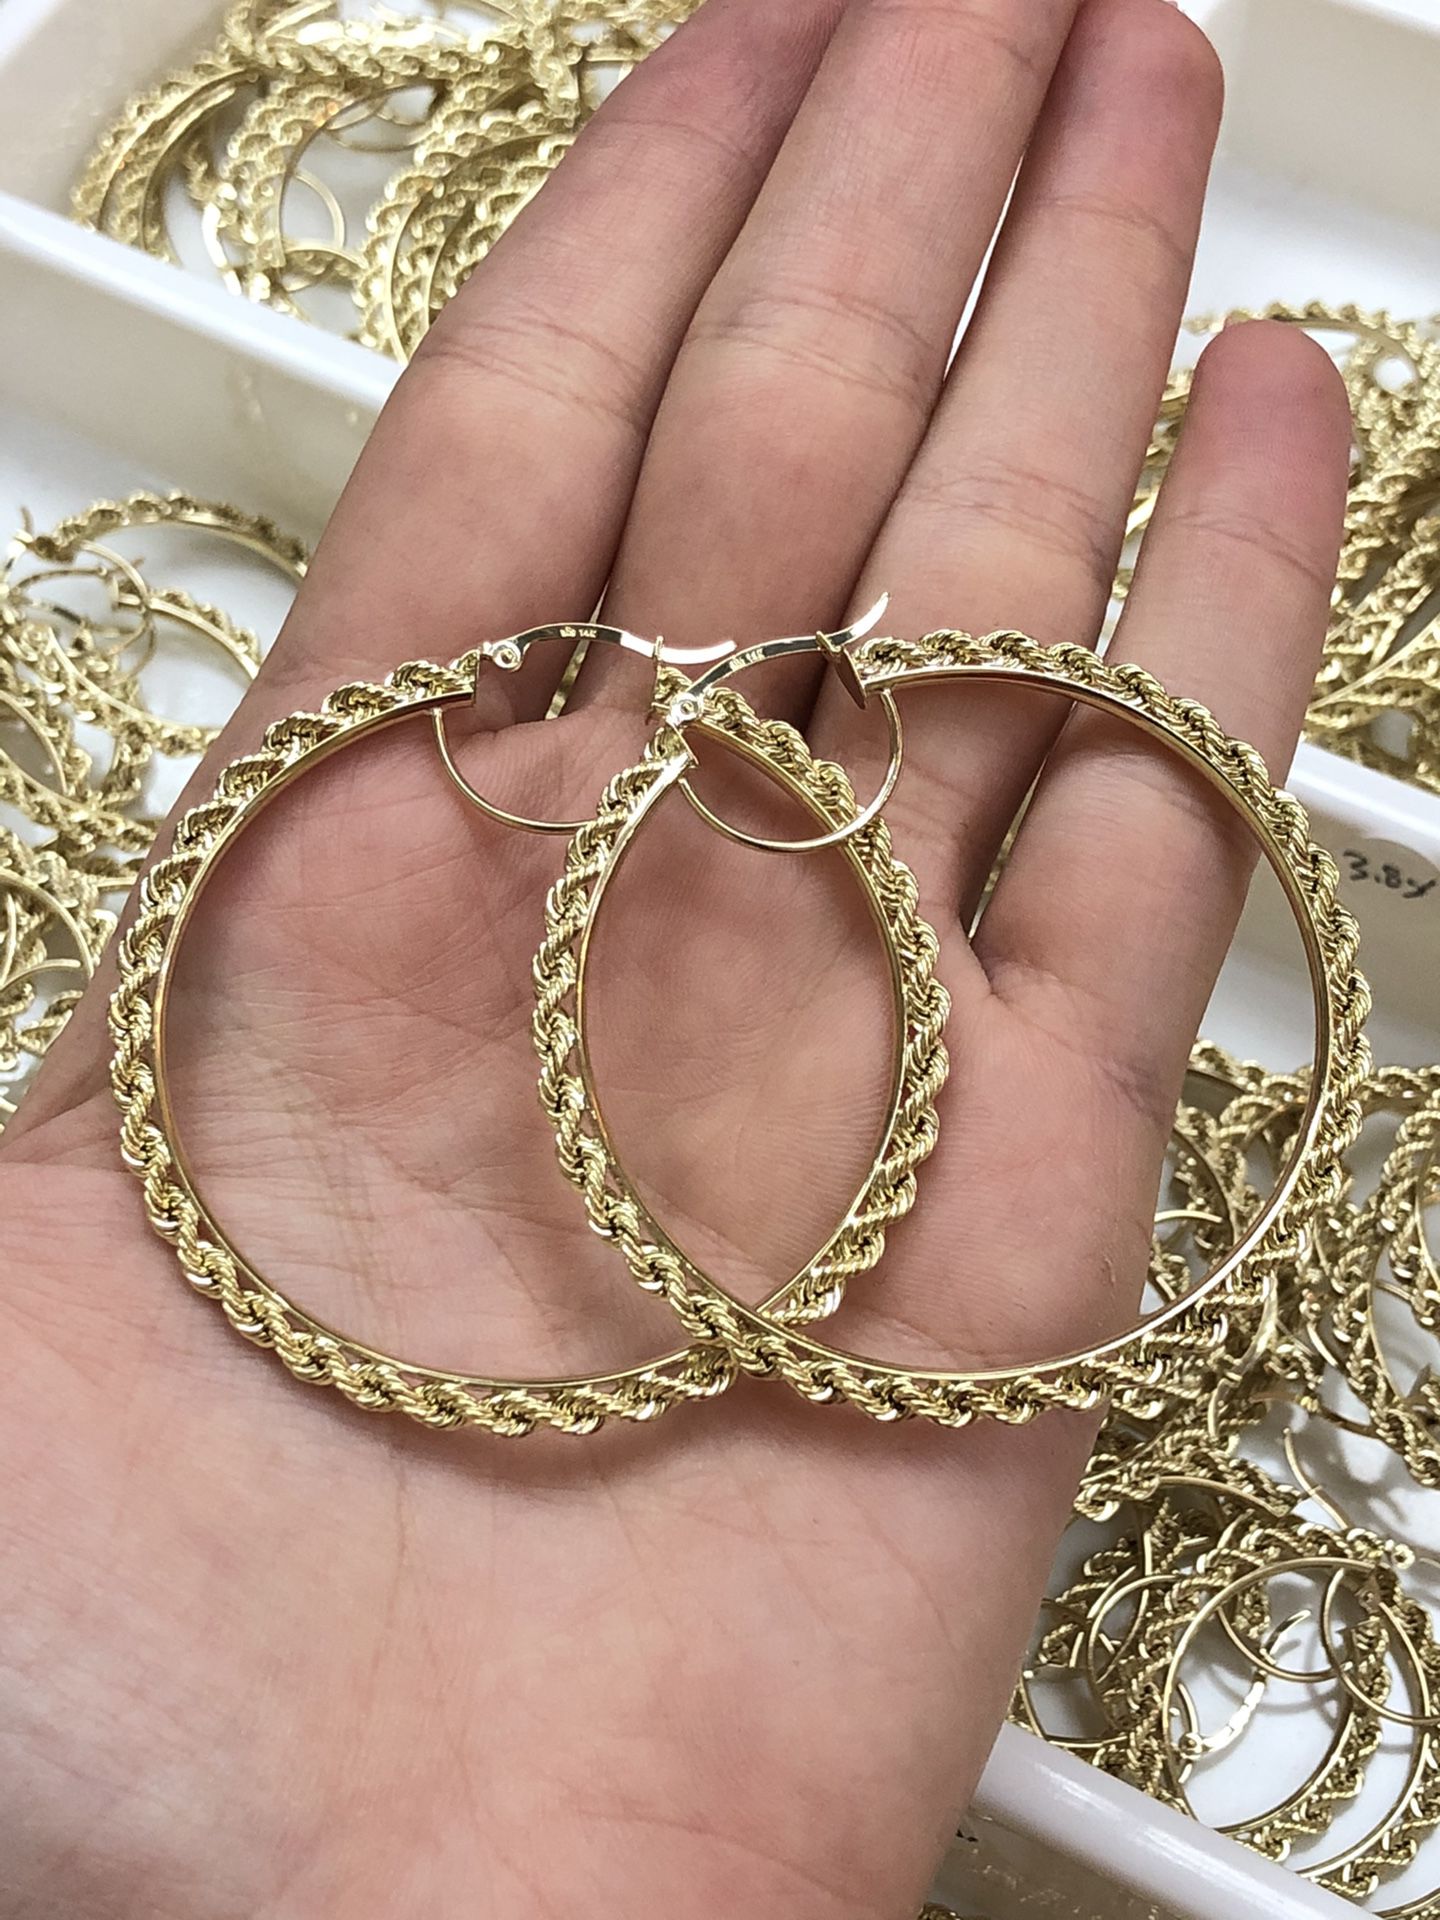 📣NEW NEW NEW📣, Beautiful assorted Sizes hollow rope diamond cut hoop earrings 14K REAL yellow GOLD. Description⤵️